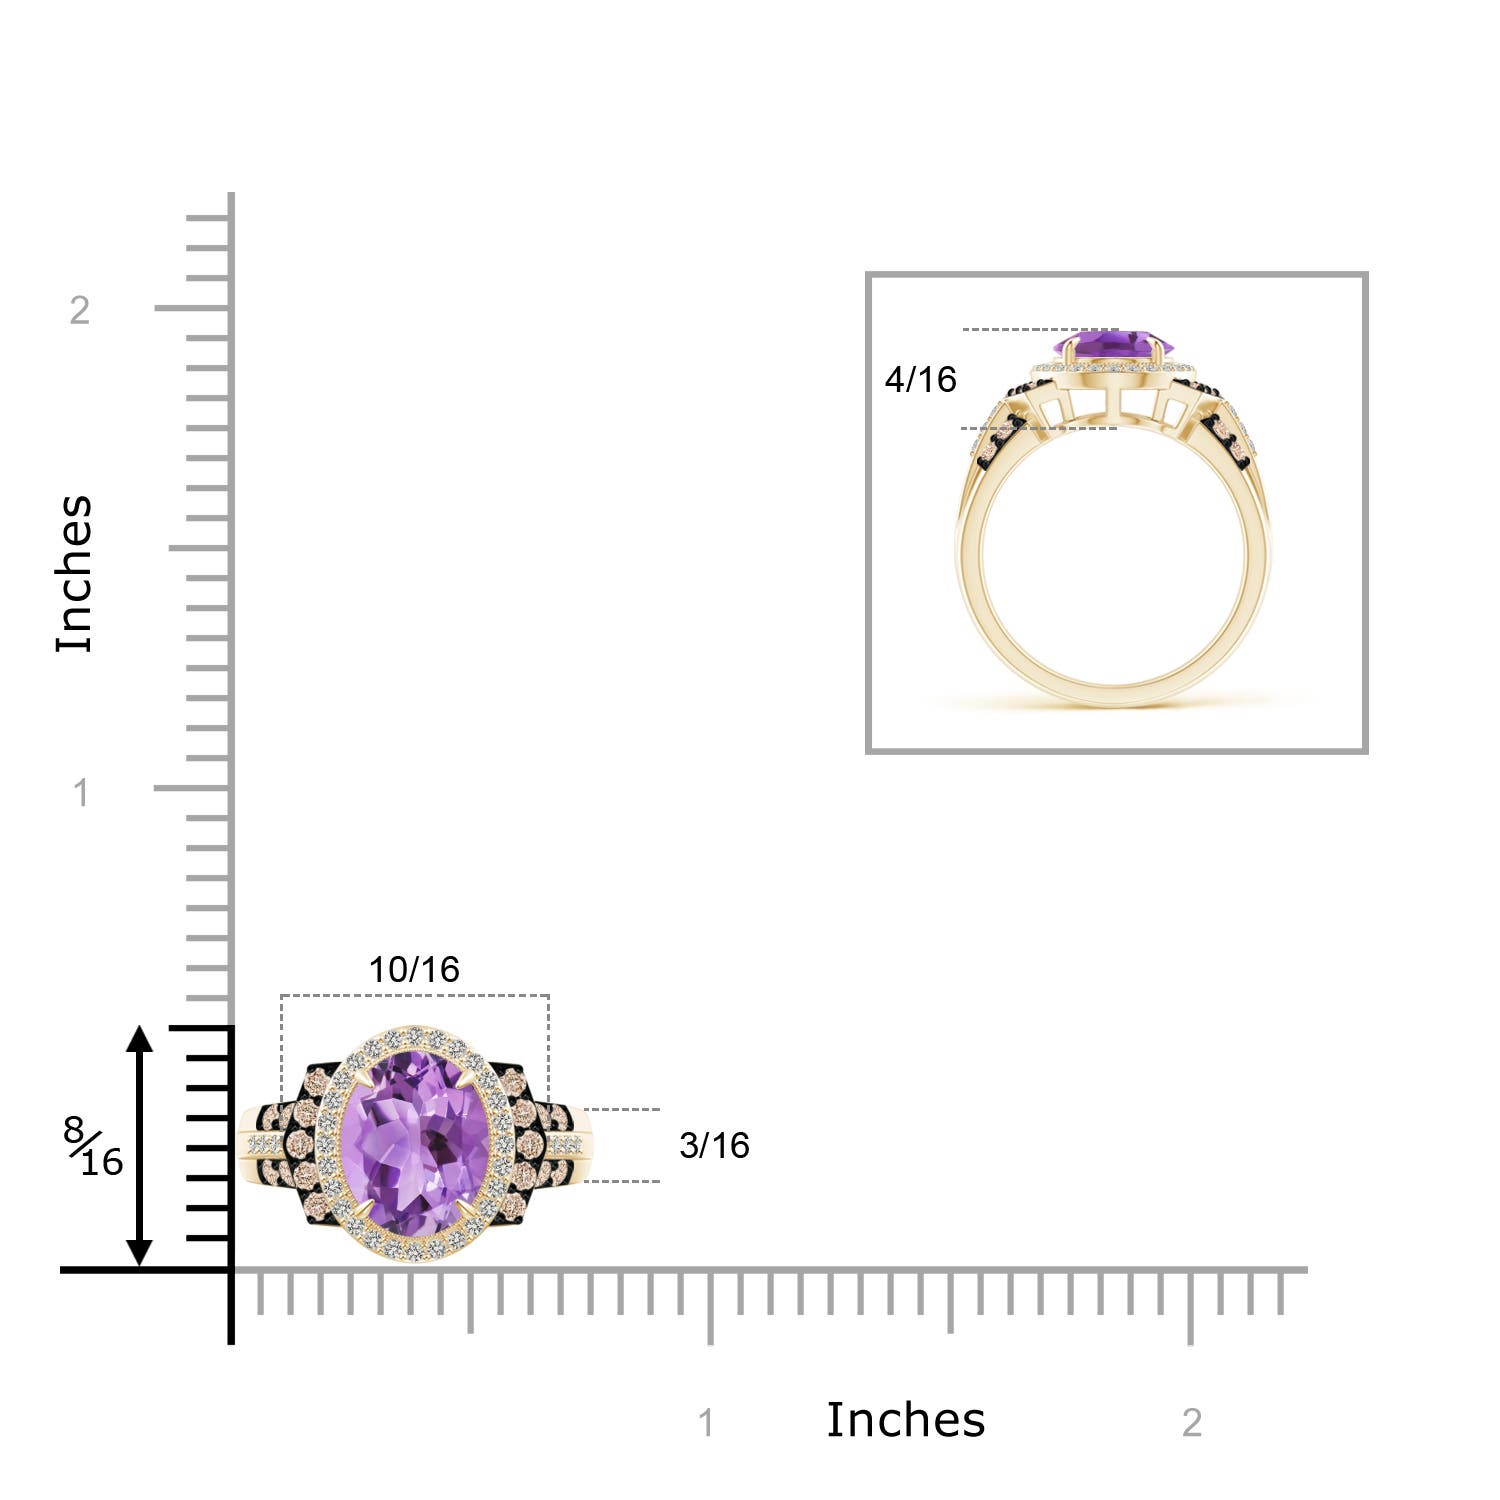 A - Amethyst / 2.02 CT / 14 KT Yellow Gold